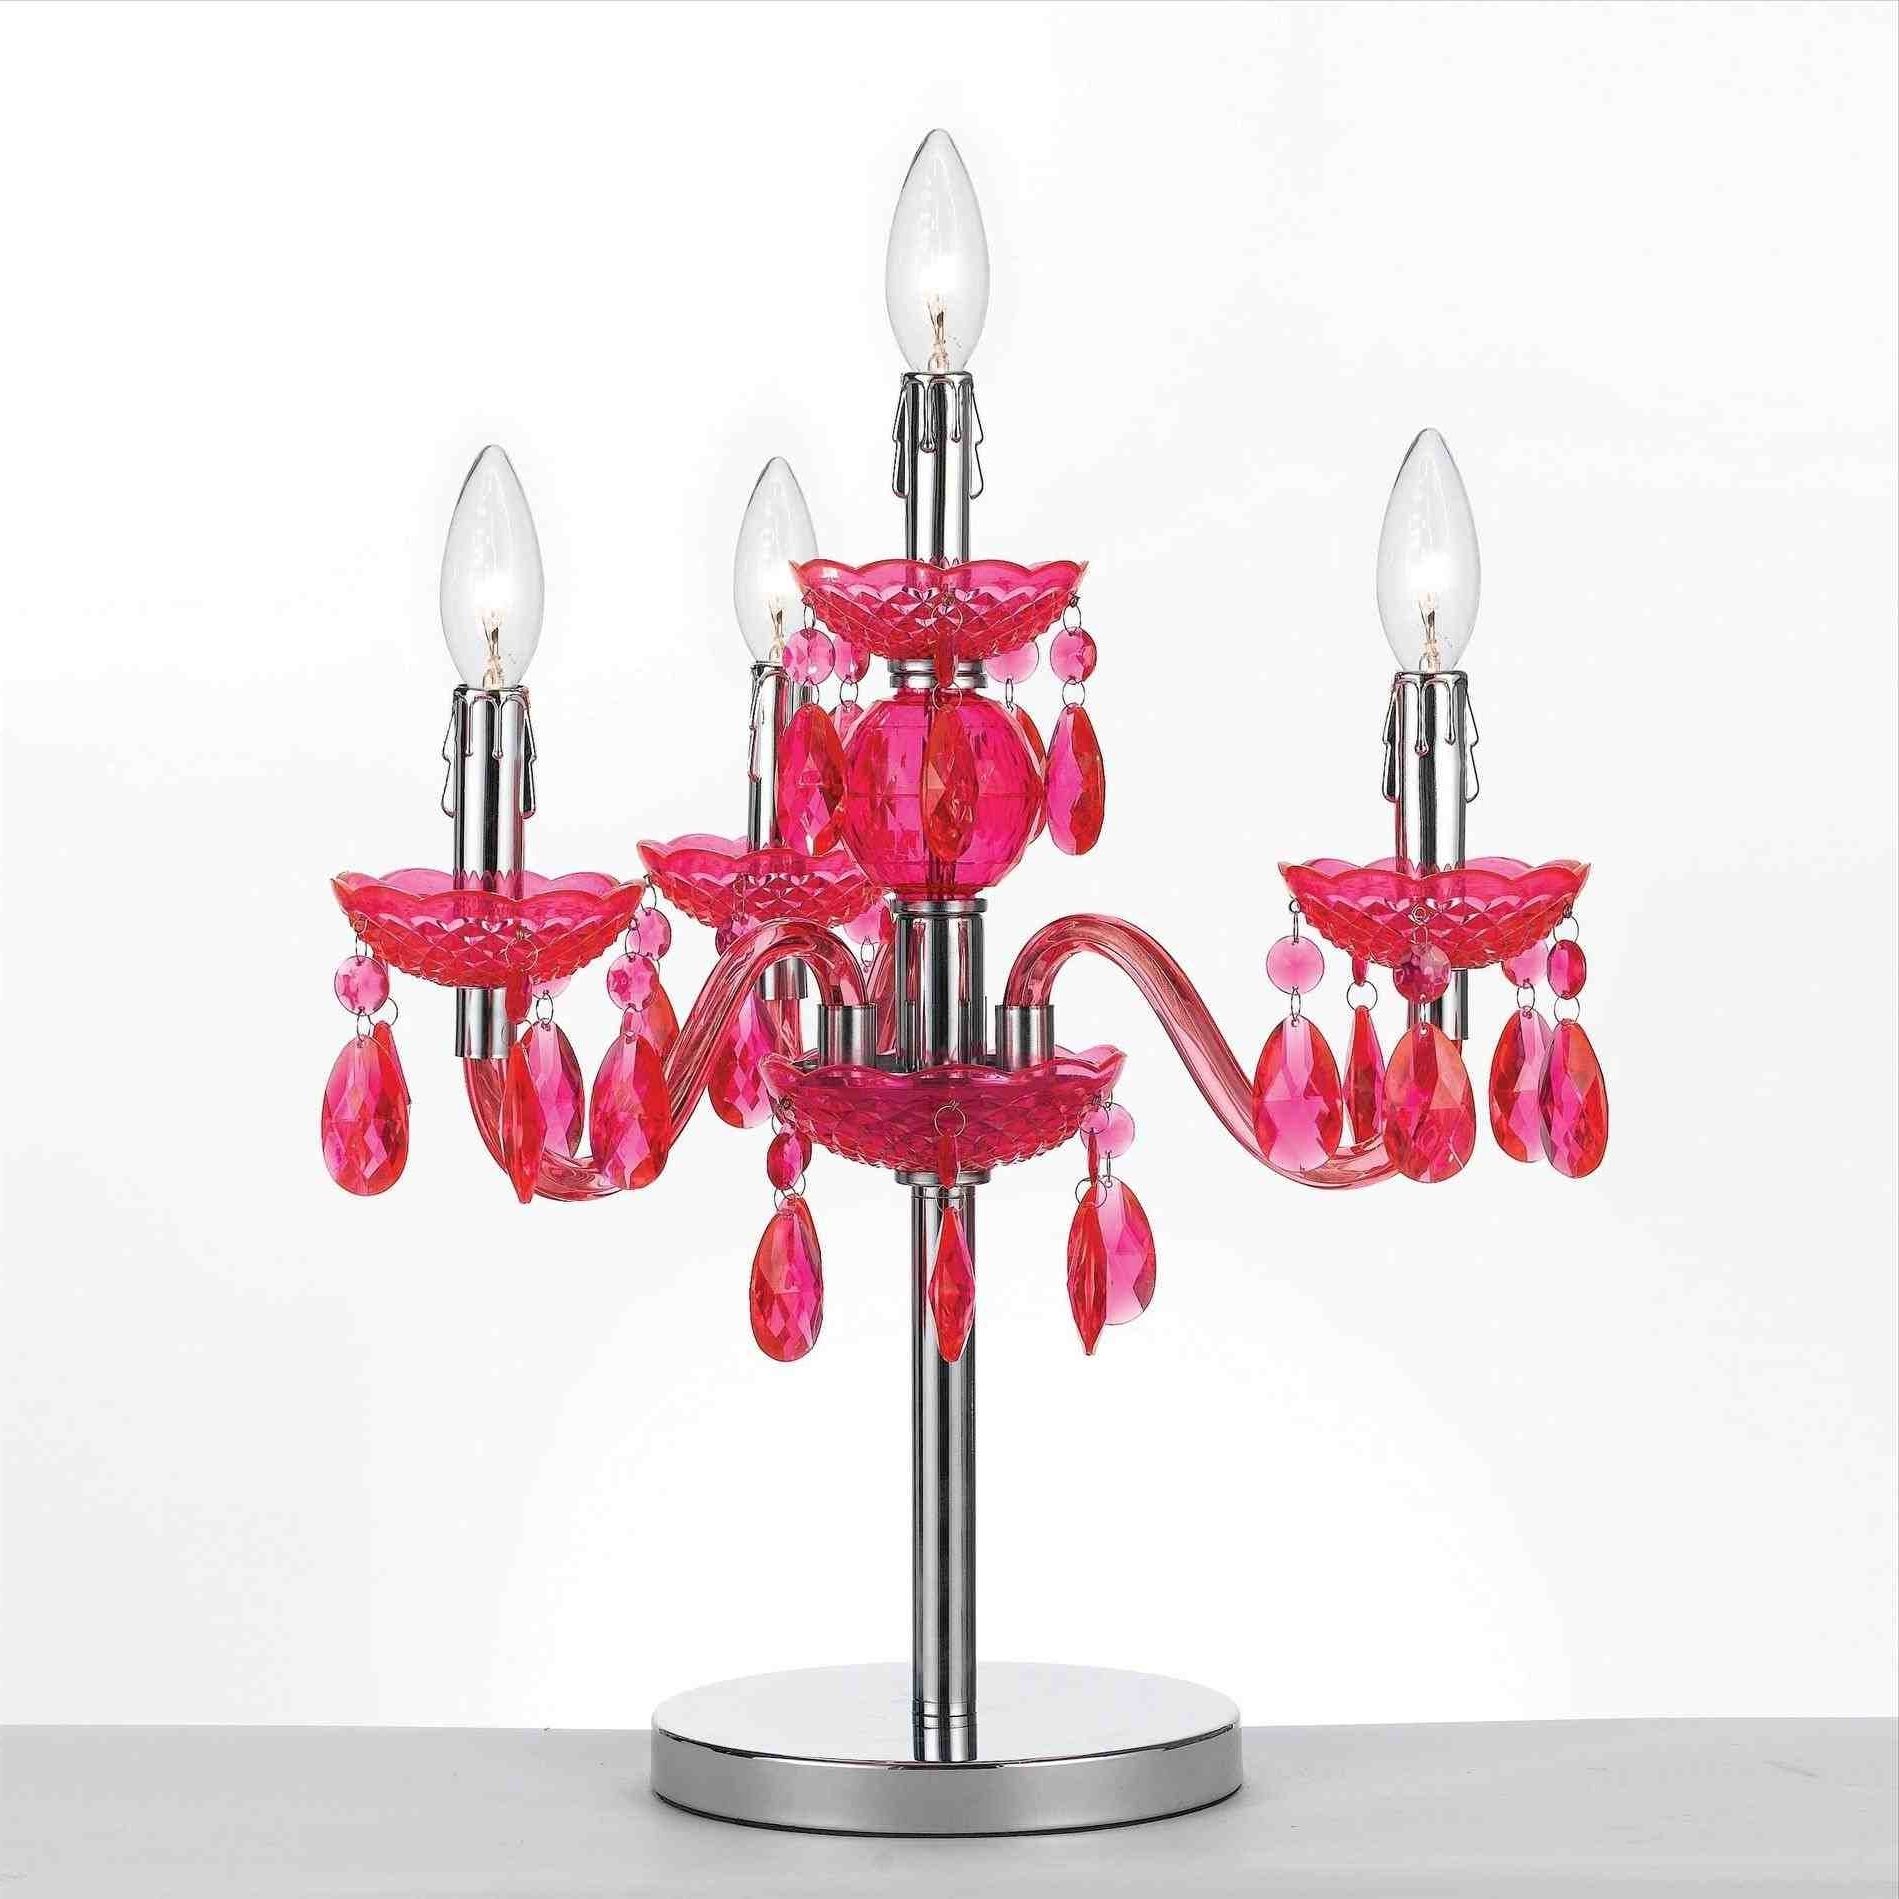 Trendy Small Chandelier Table Lamps Inside Chandelier Table Lamp Collection Of Small Chandelier Table Lamps (View 12 of 15)